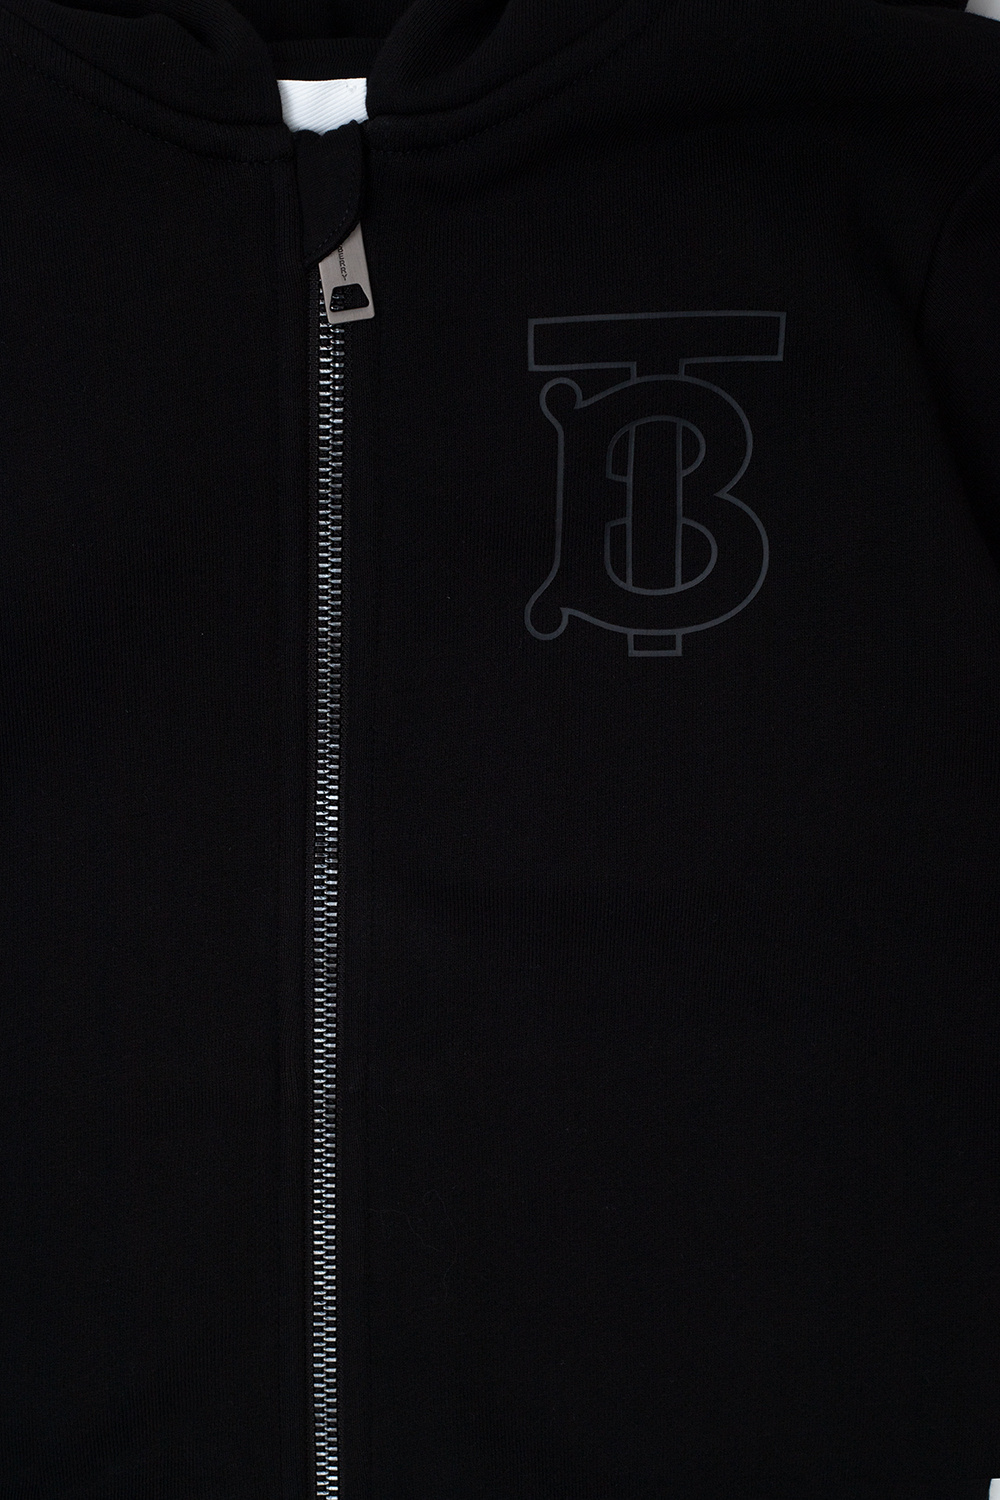 Burberry Kids ‘Lester’ hoodie with logo